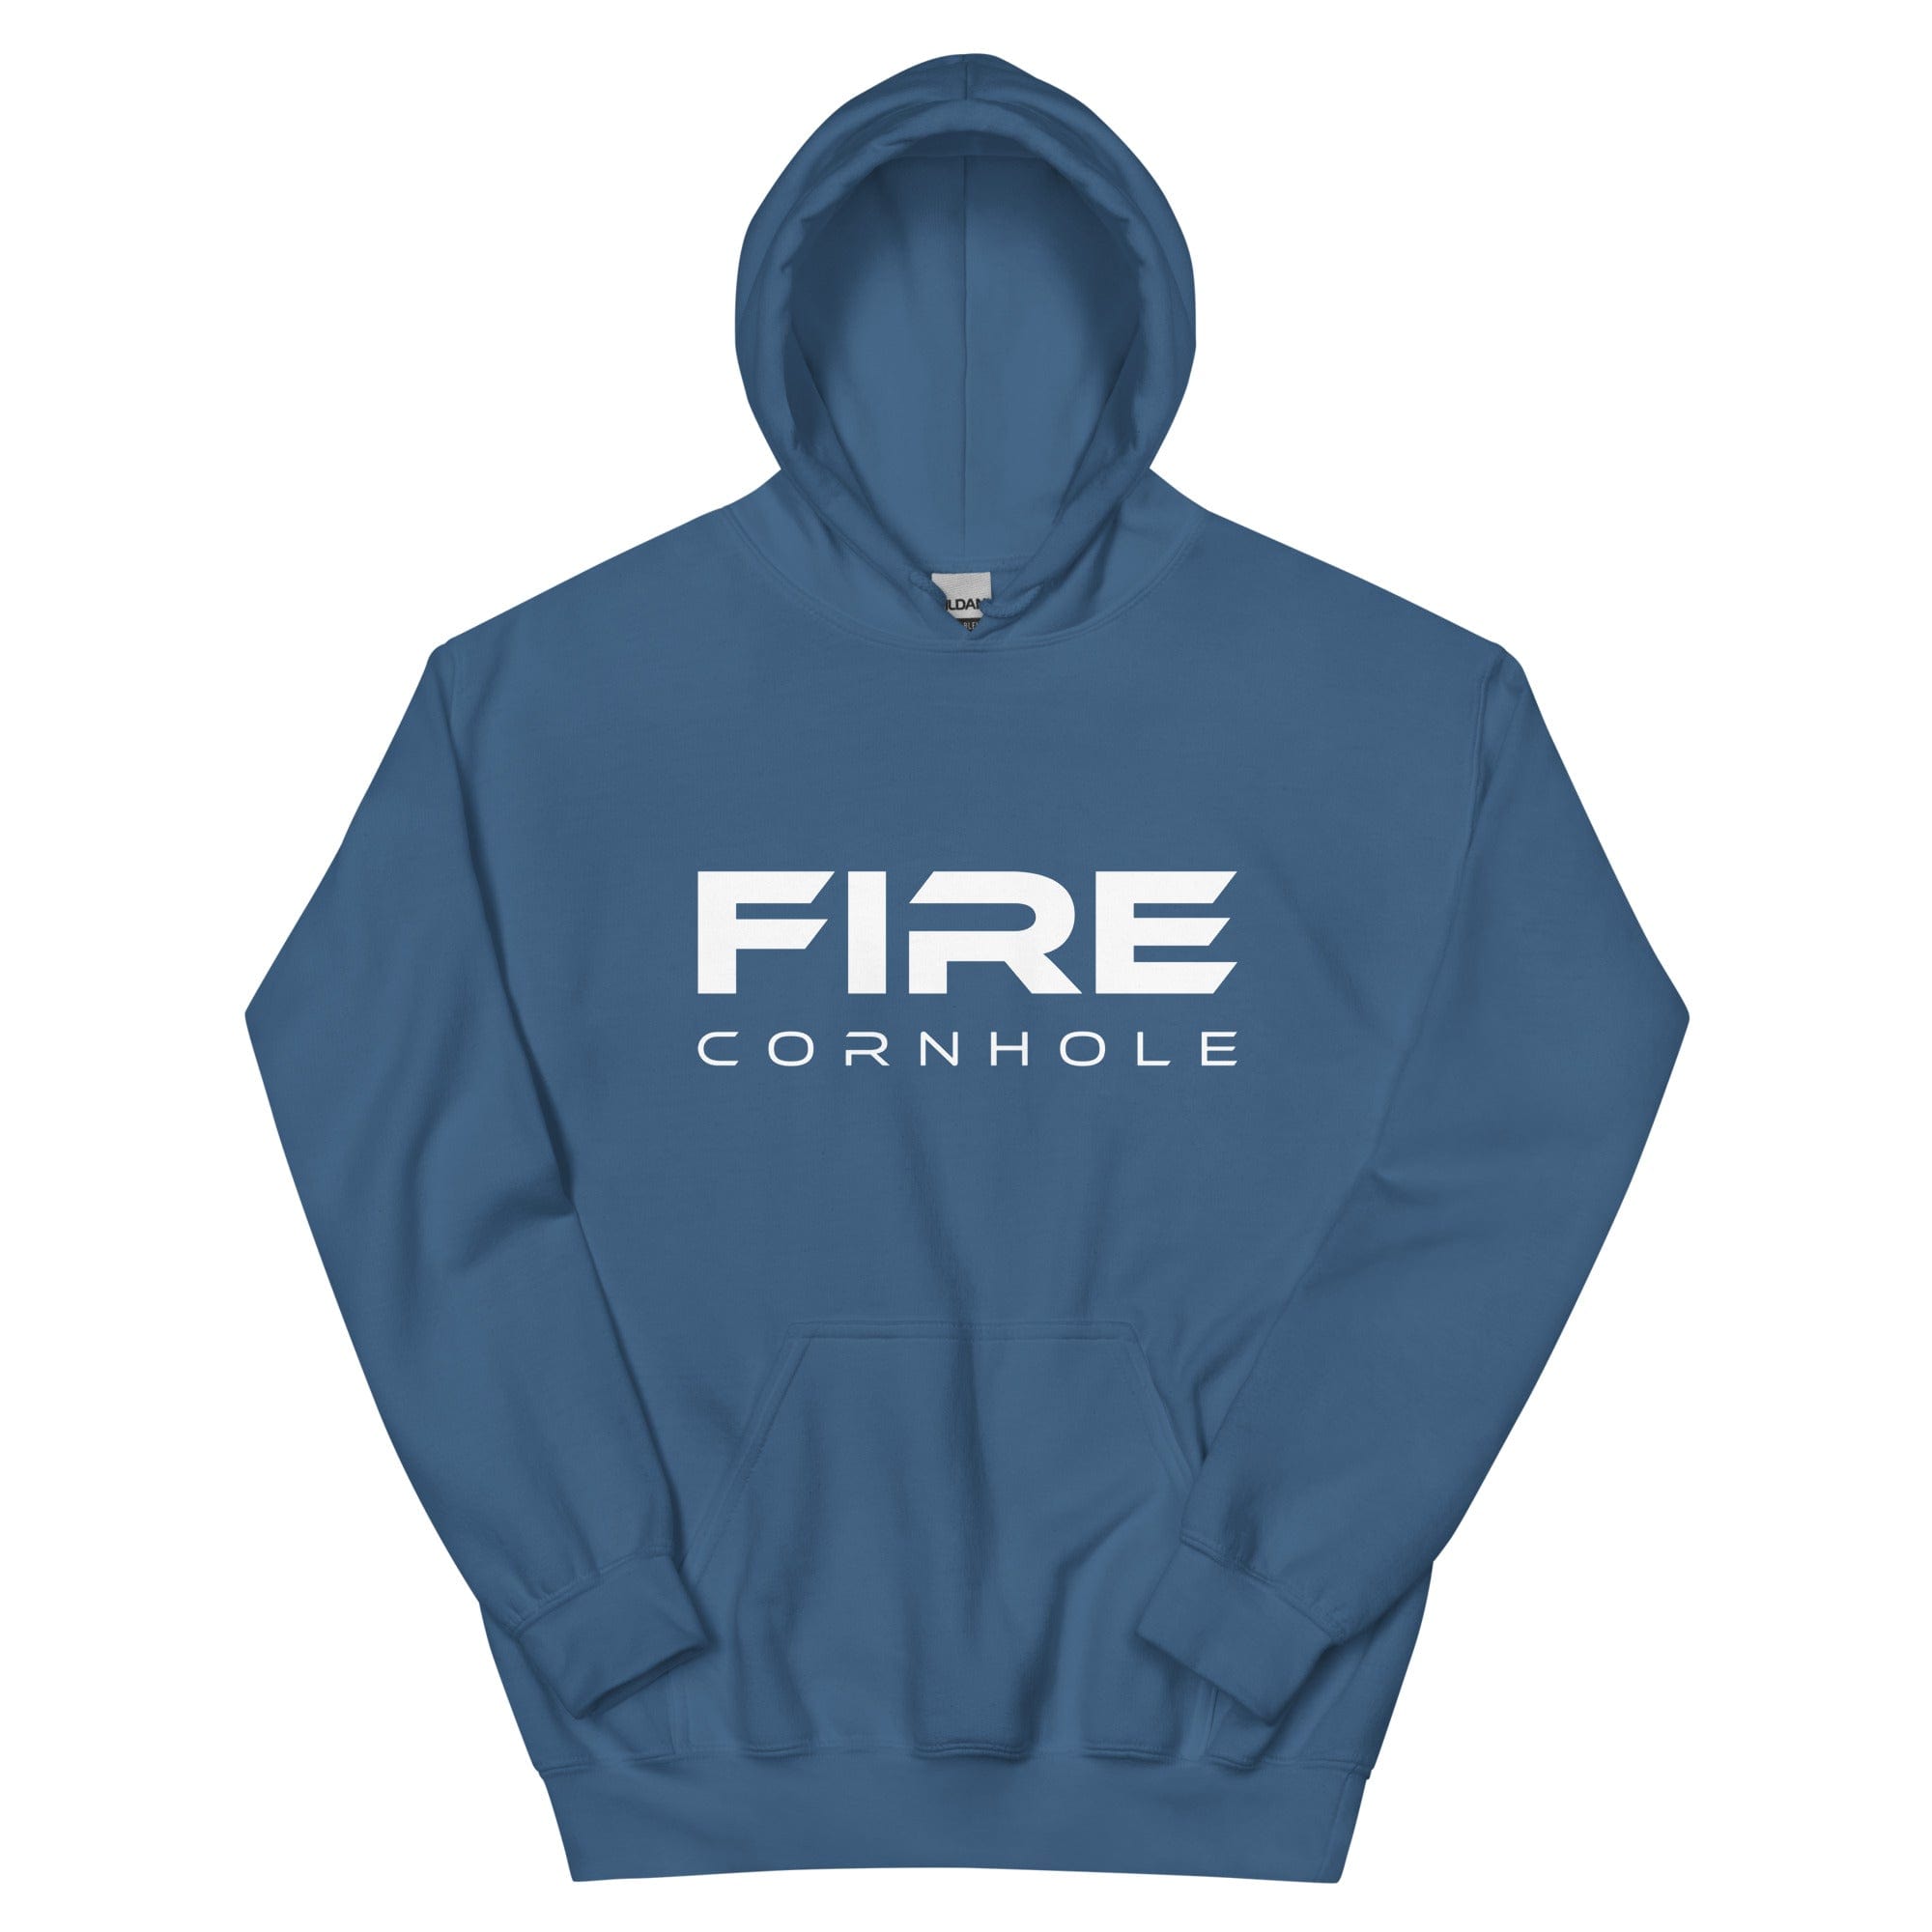 Teal unisex cotton hoodie with Fire Cornhole logo in white